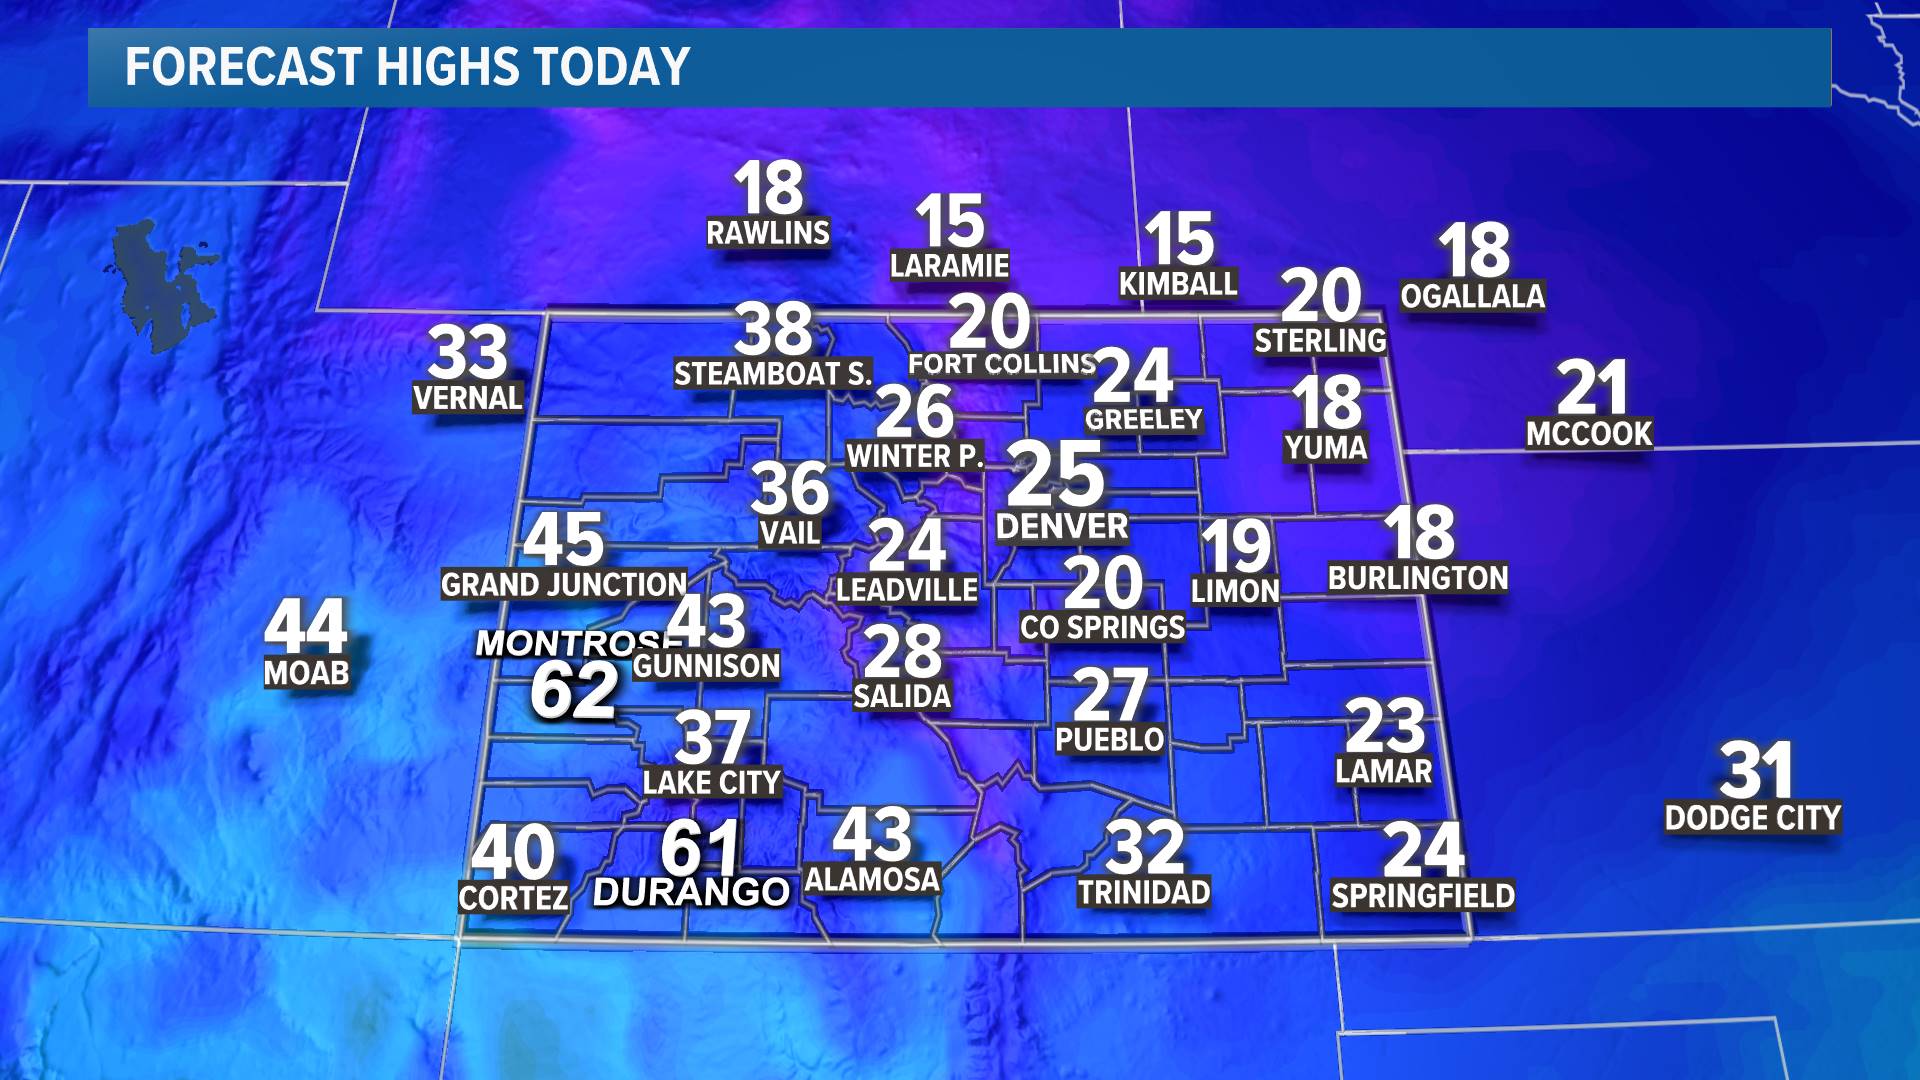 Regional Highs Today